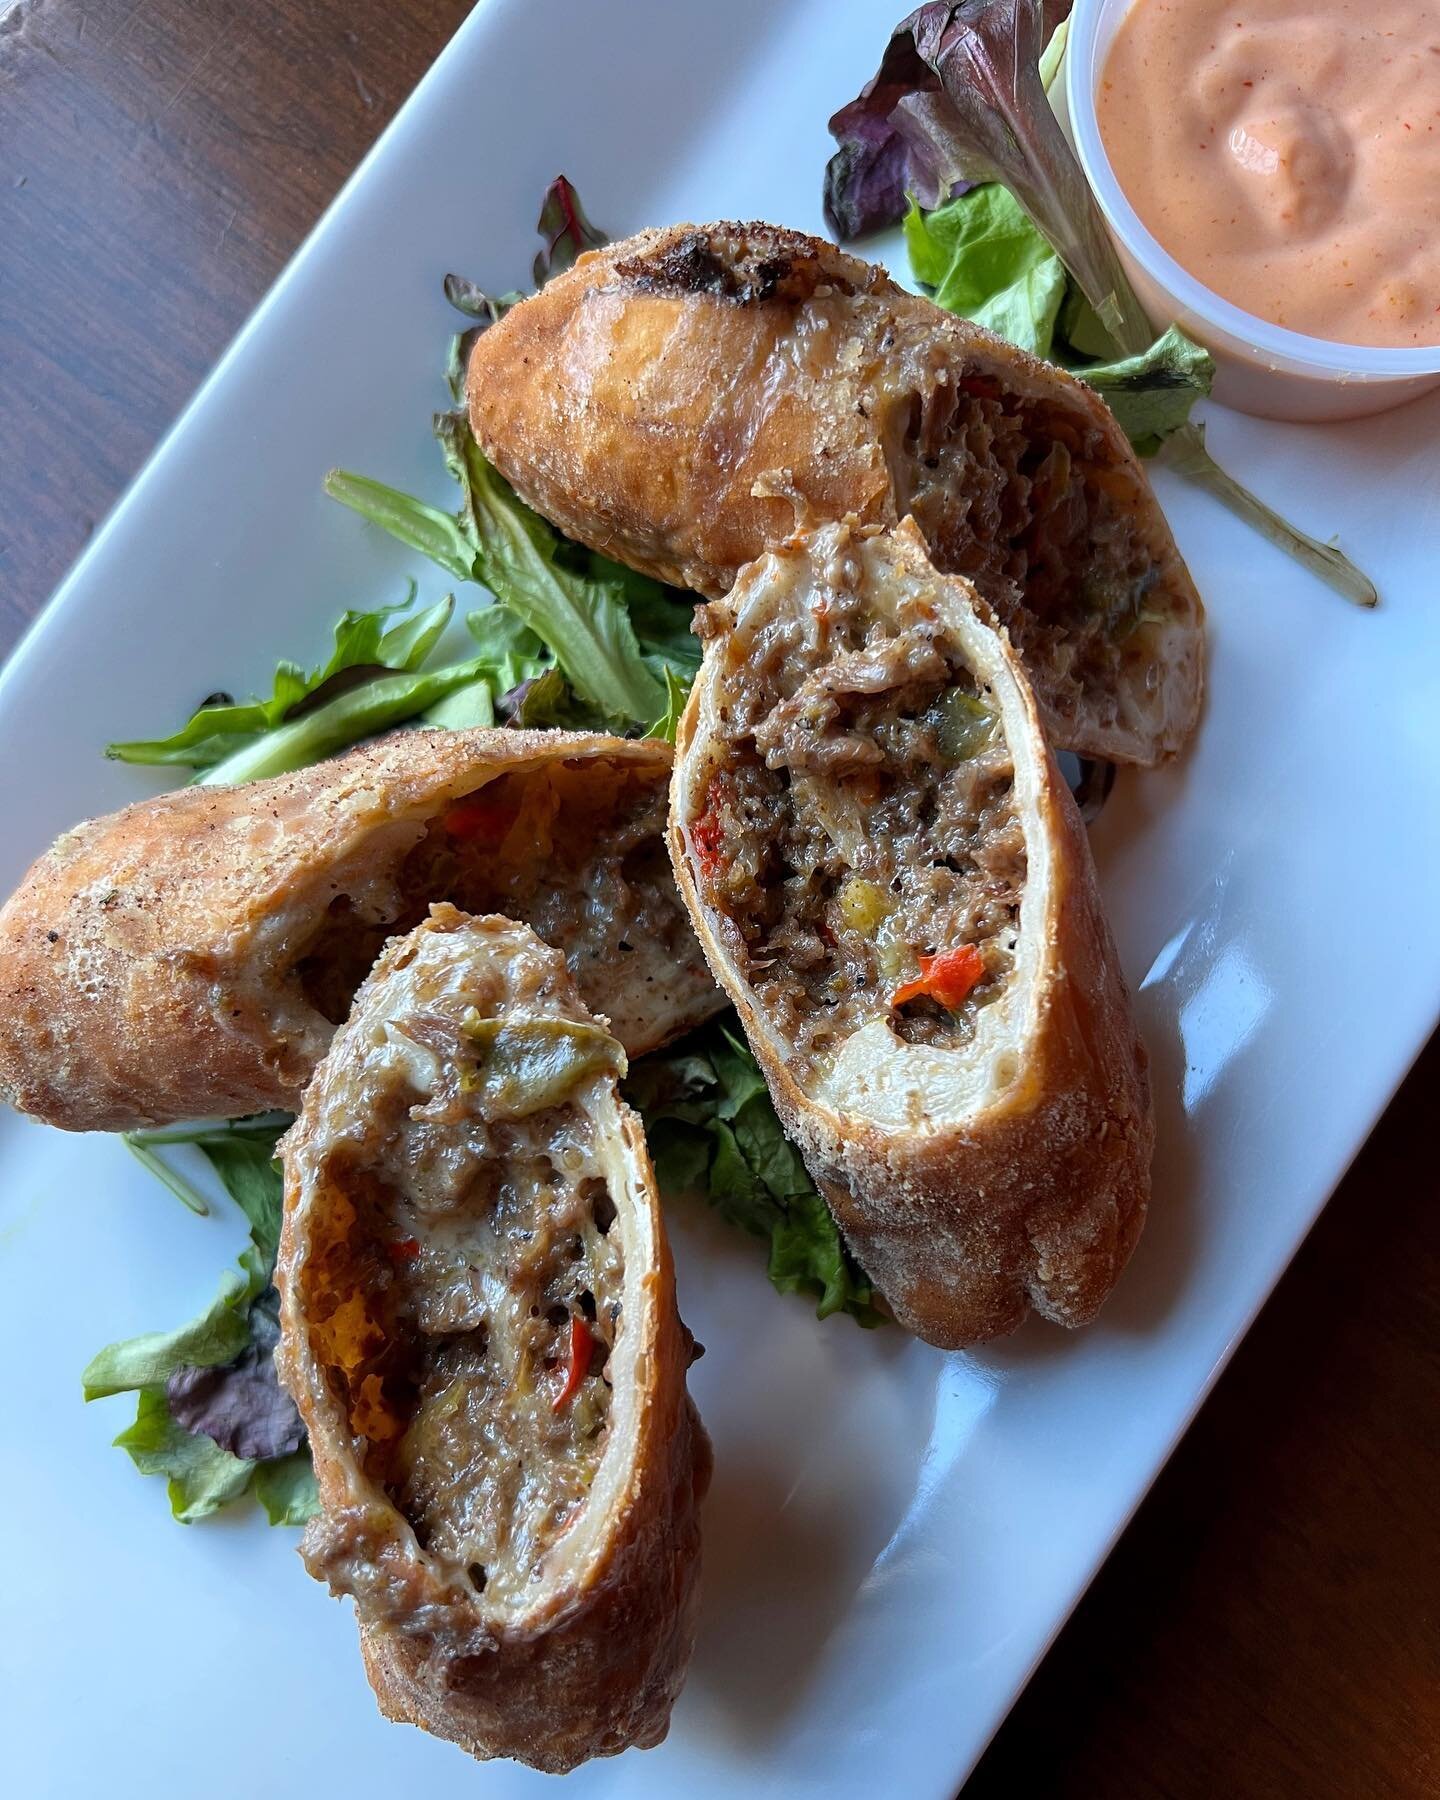 We took one of our favorite appetizers and made it ourselves! Everything is better when it&rsquo;s homemade😏👨&zwj;🍳 on the specials this week HOMEMADE PHILLY STEAK AND CHEESE EGG ROLLS with a spicy ketchup aioli